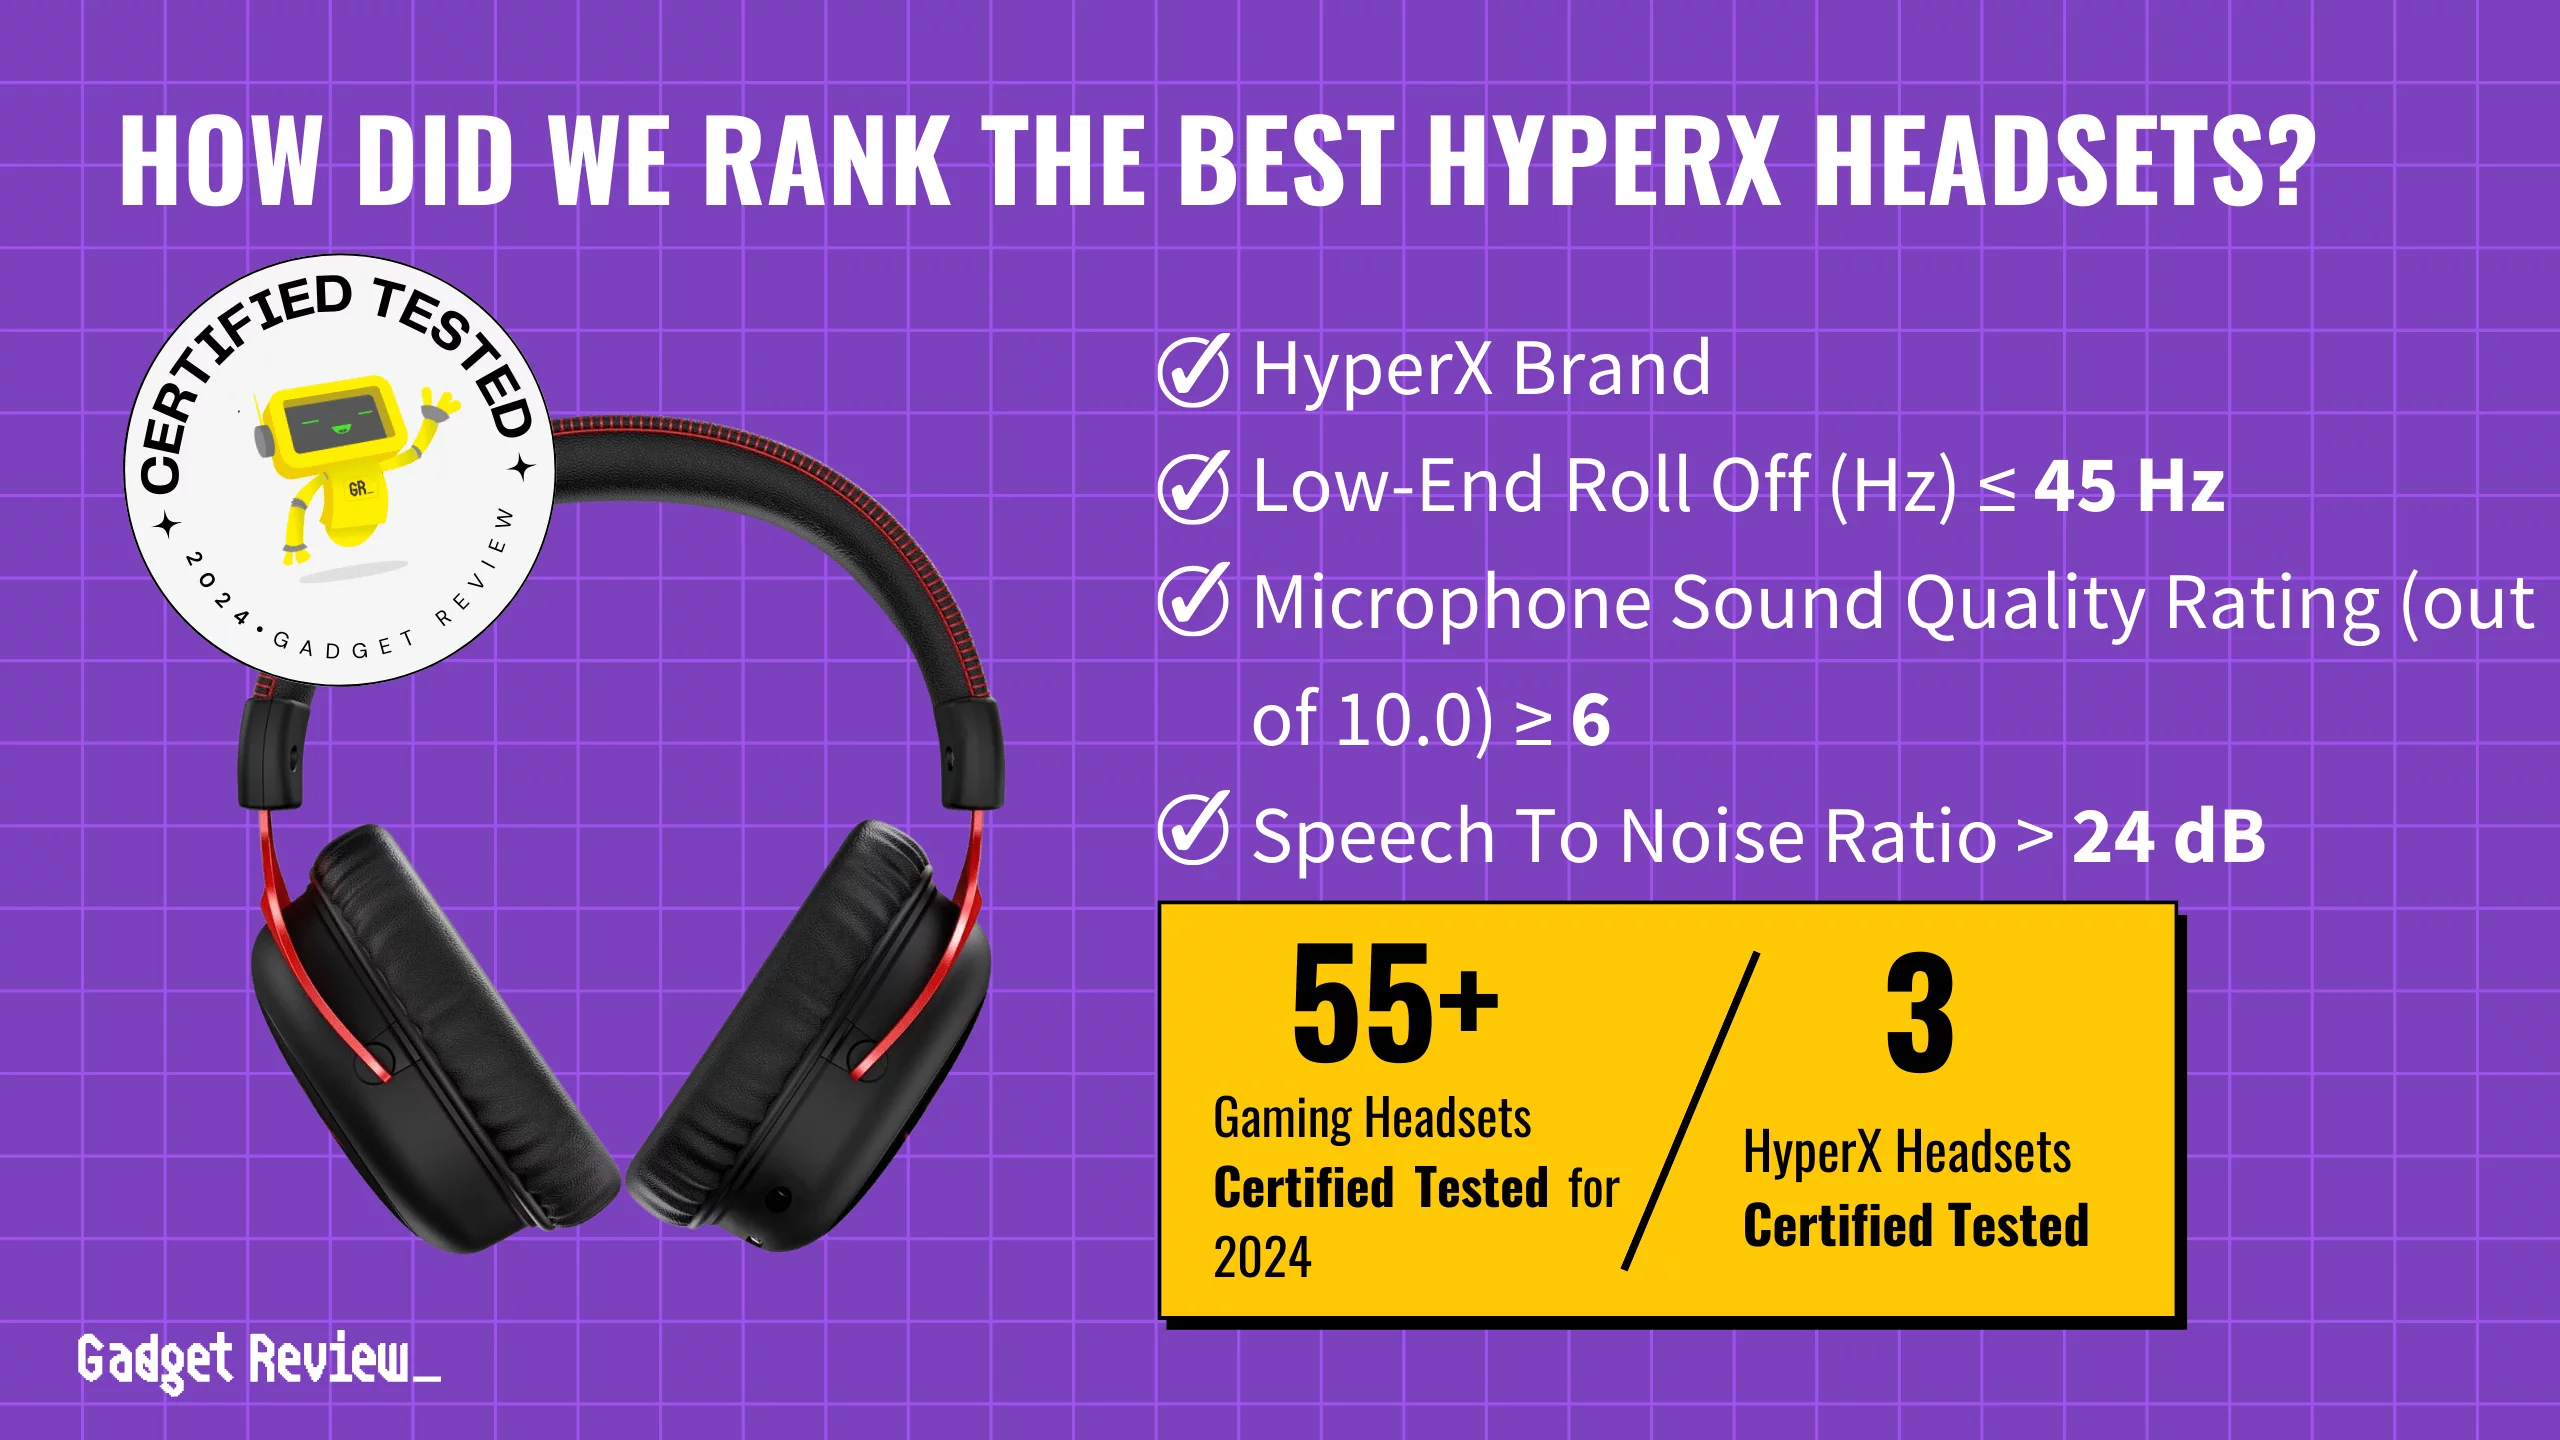 We Ranked the 3 Best HyperX Headsets